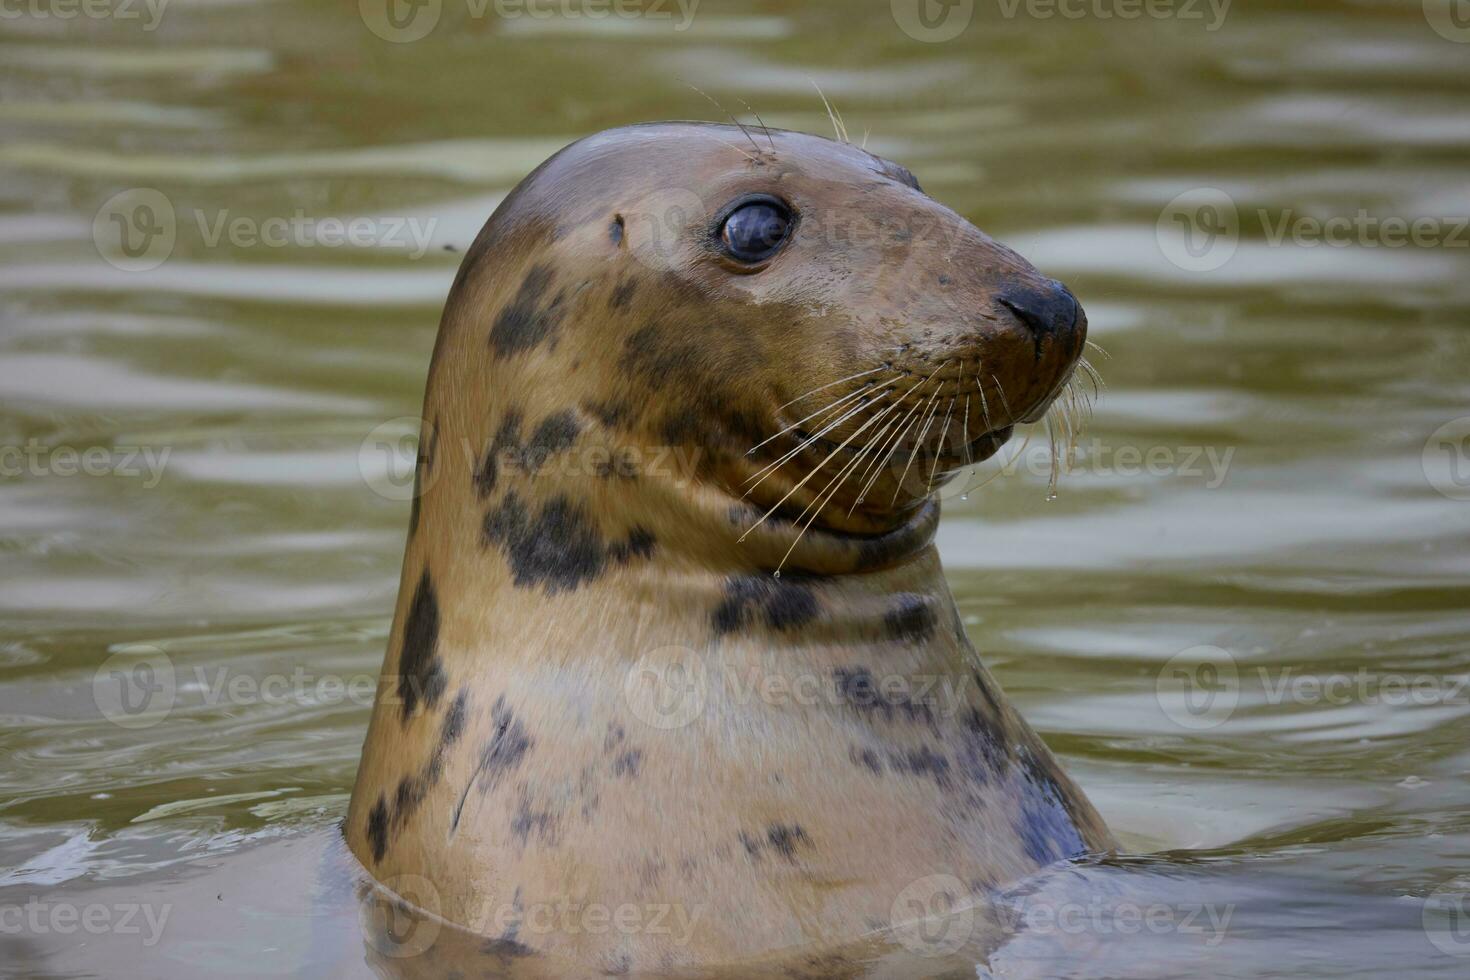 Curious Grey Seal, Halichoerus grypus, with head out of the water photo